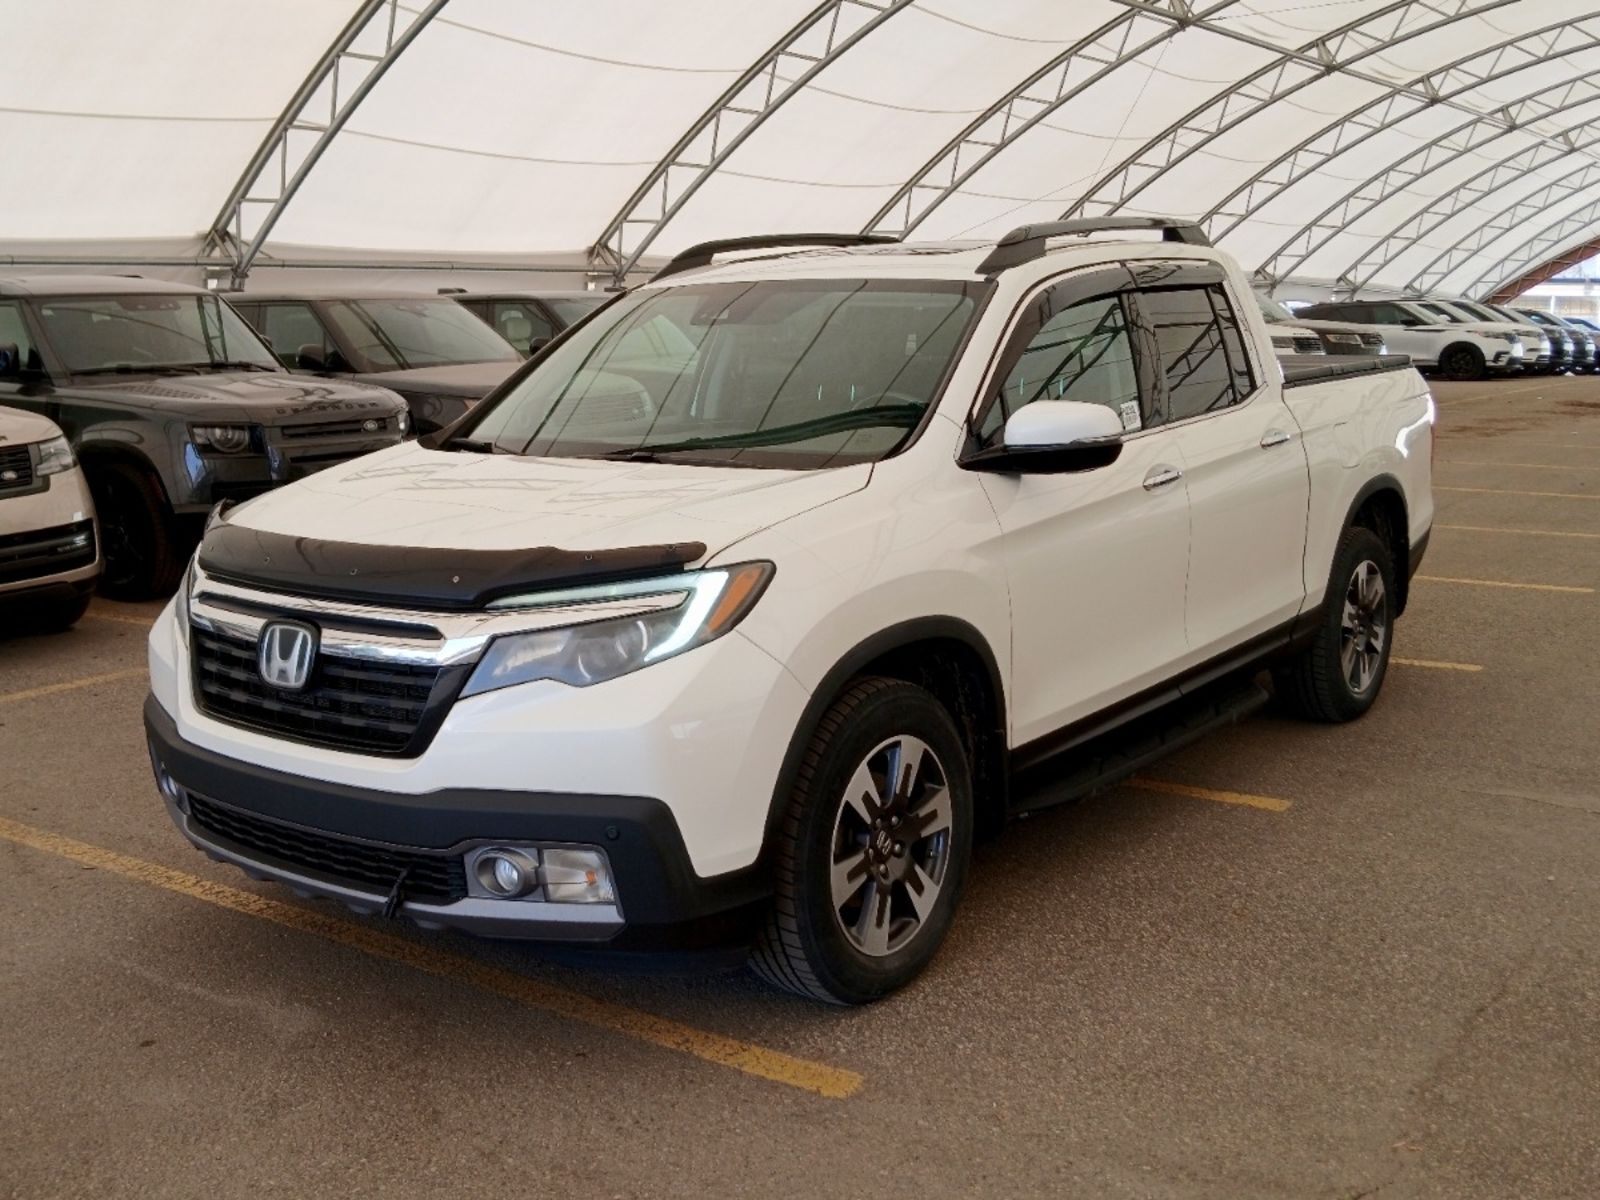 2017 Honda Ridgeline Touring - One Owner | No Accidents | Leather